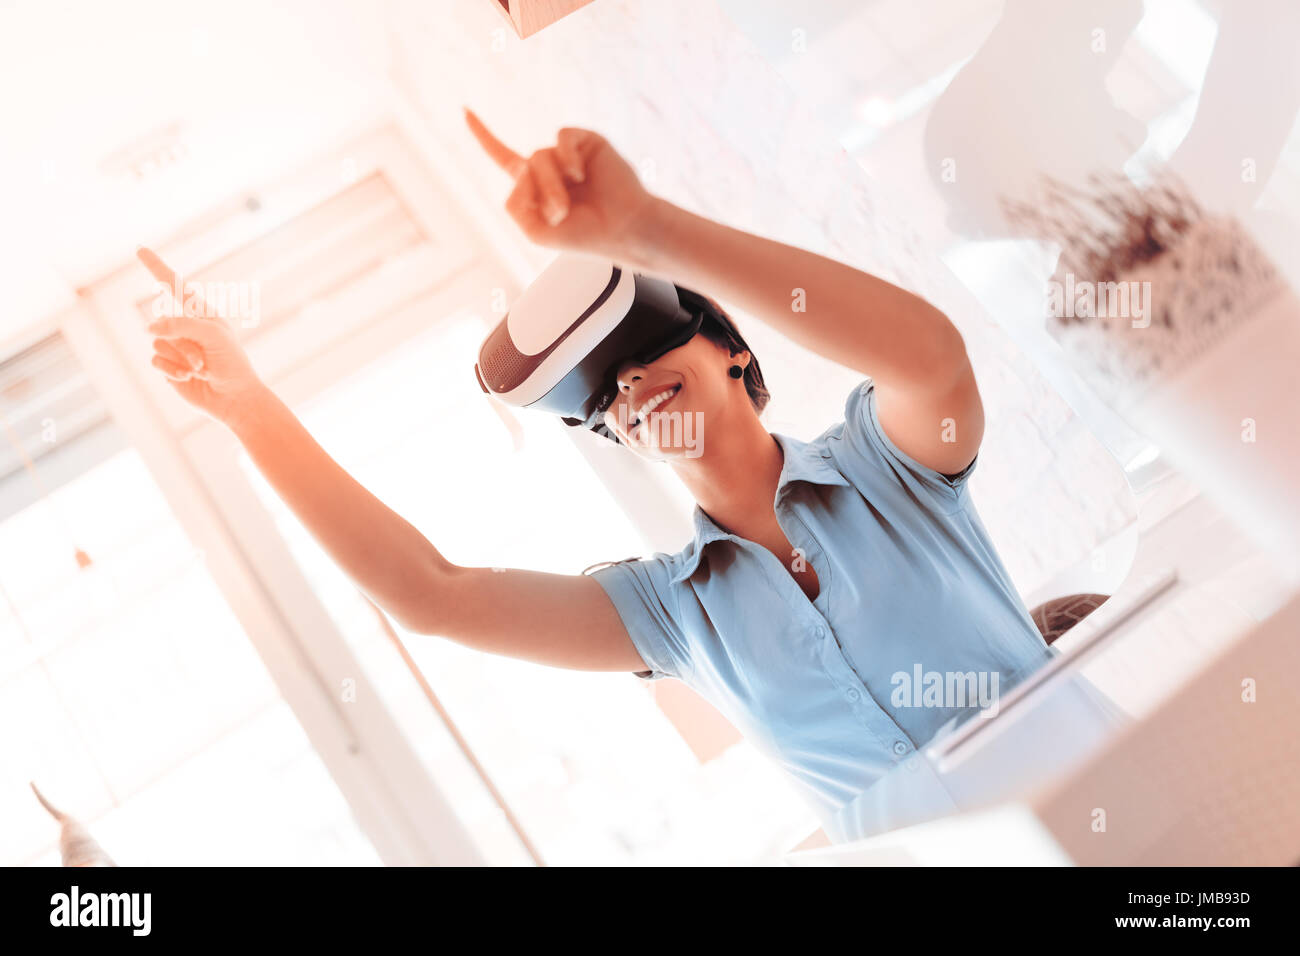 Smiling businesswoman using virtual reality glasses in a cafe. Stock Photo